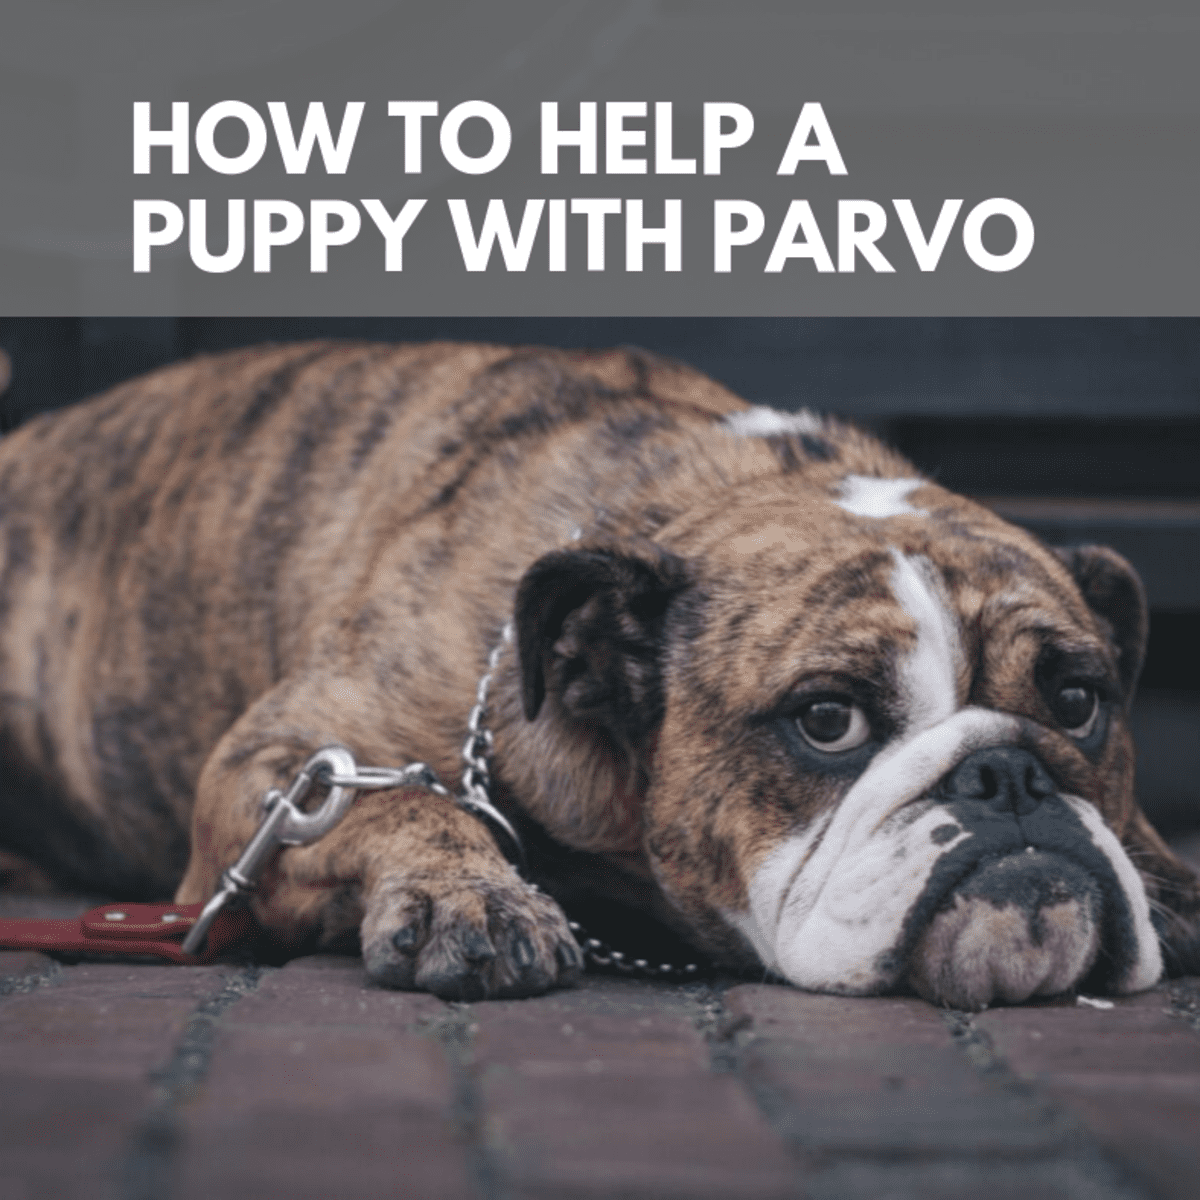 if your puppy has parvo